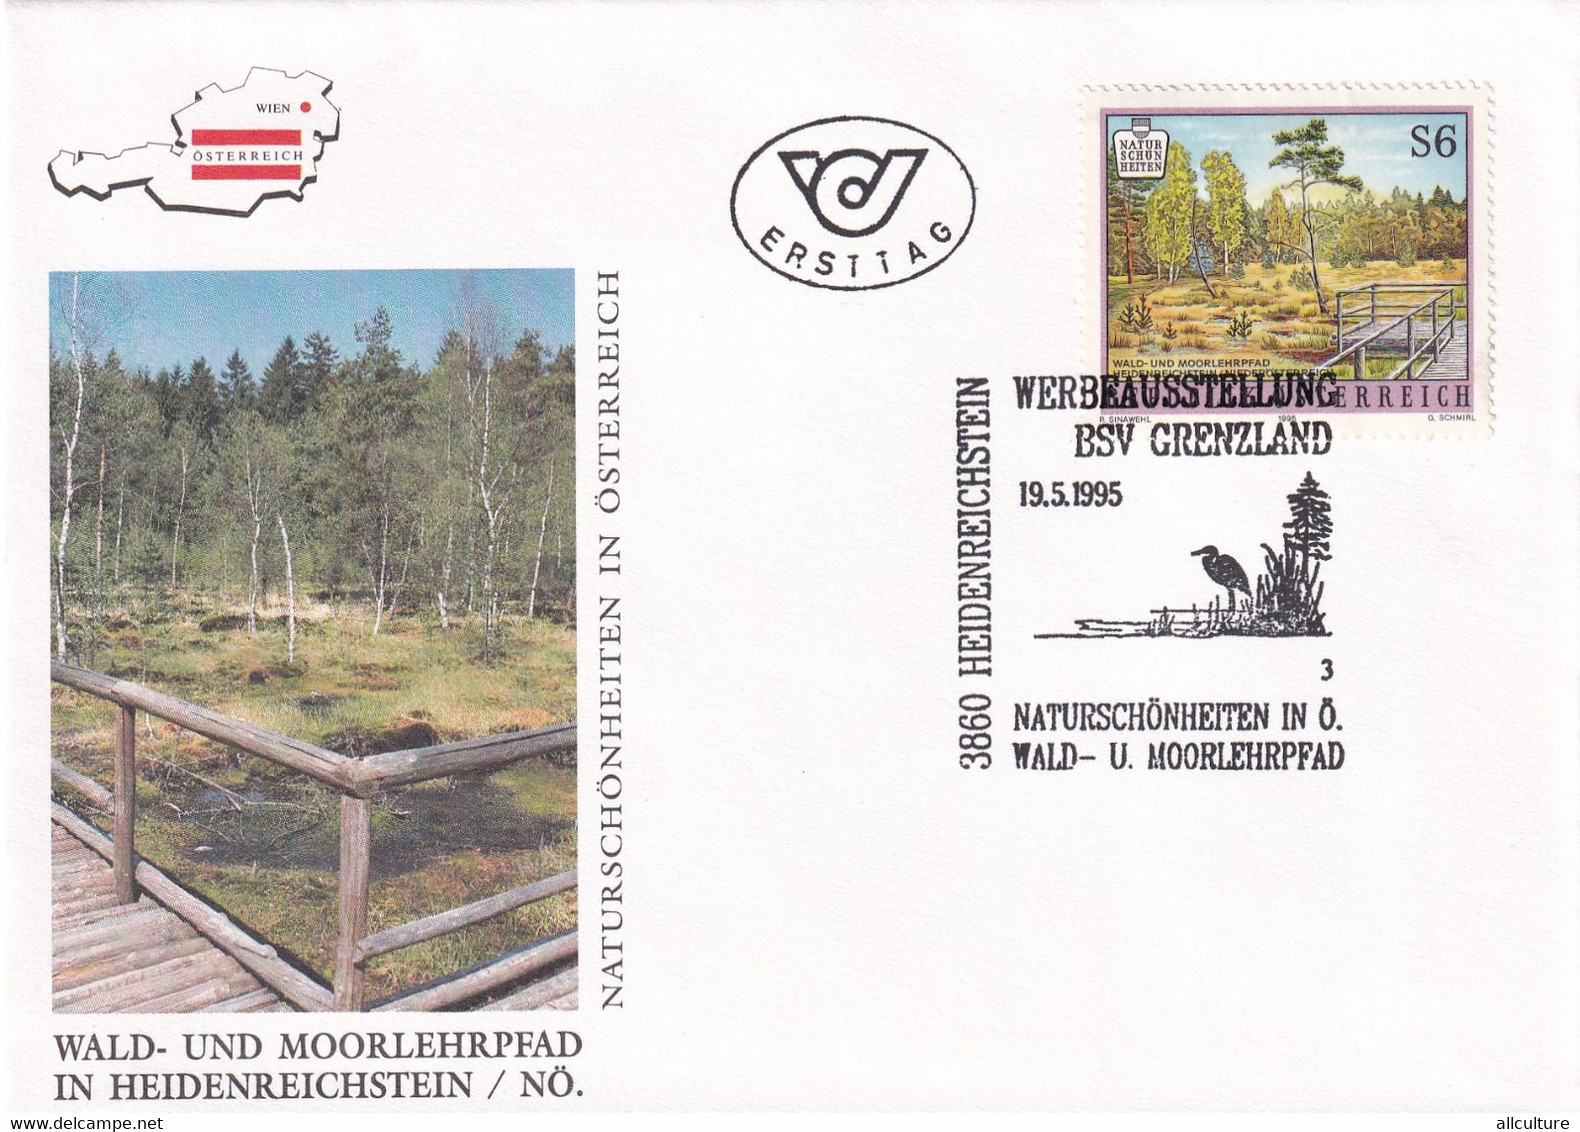 A8194 - FORREST AND MOOR NATURETRAIL AT HEIDENREICHSTEIN ERSTTAG 1995  REPUBLIC OESTERREICH USED STAMP ON COVER AUSTRIA - Covers & Documents